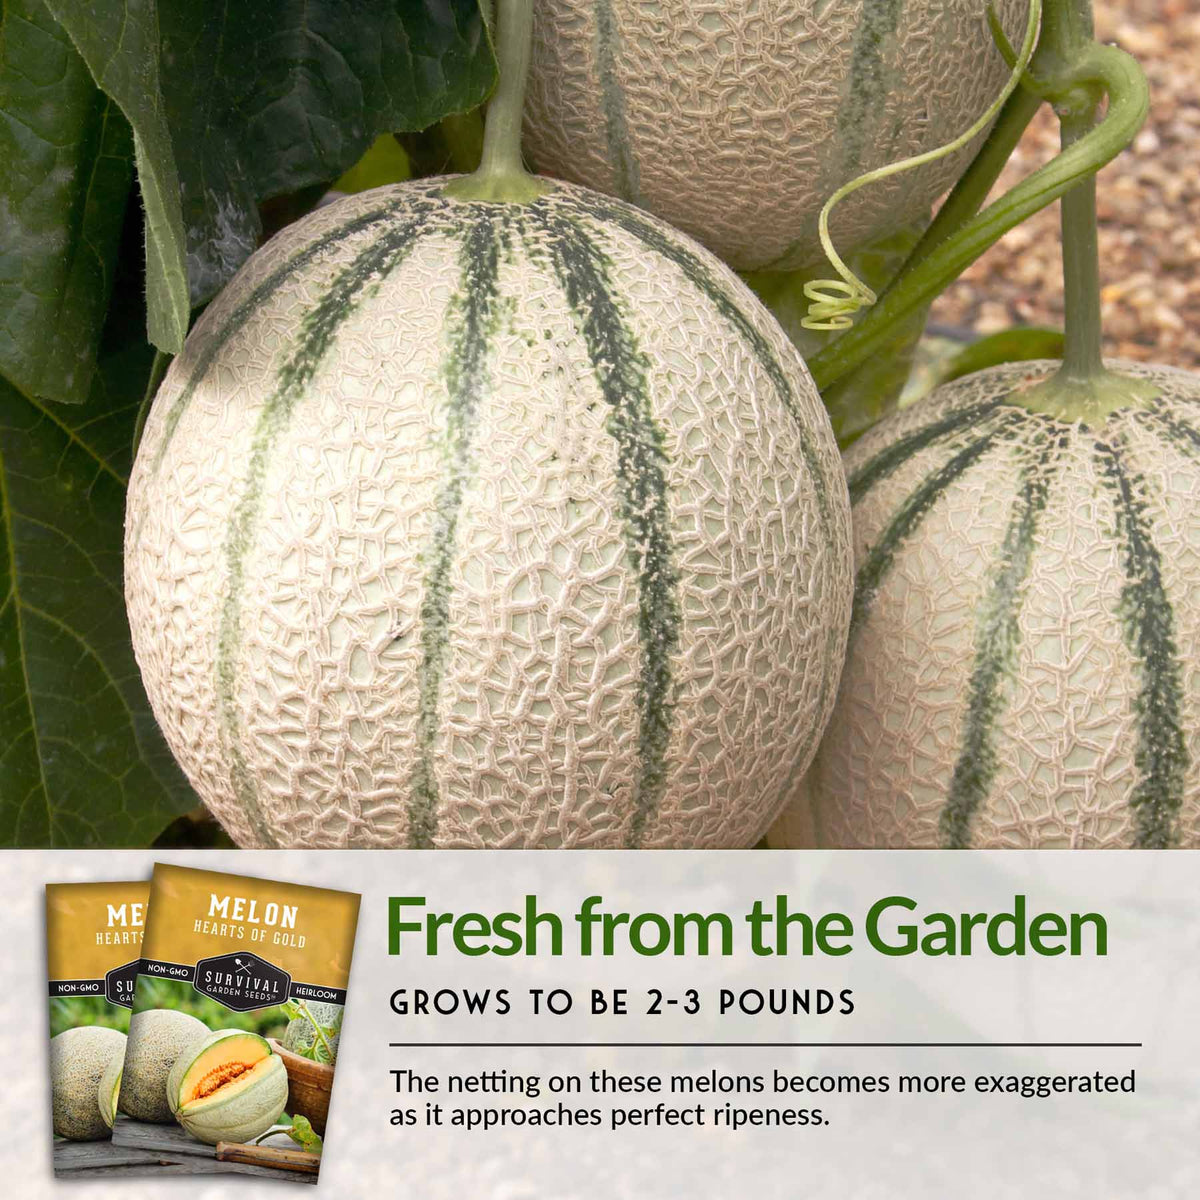 Hearts of Gold melon grows to be 2-3 pounds